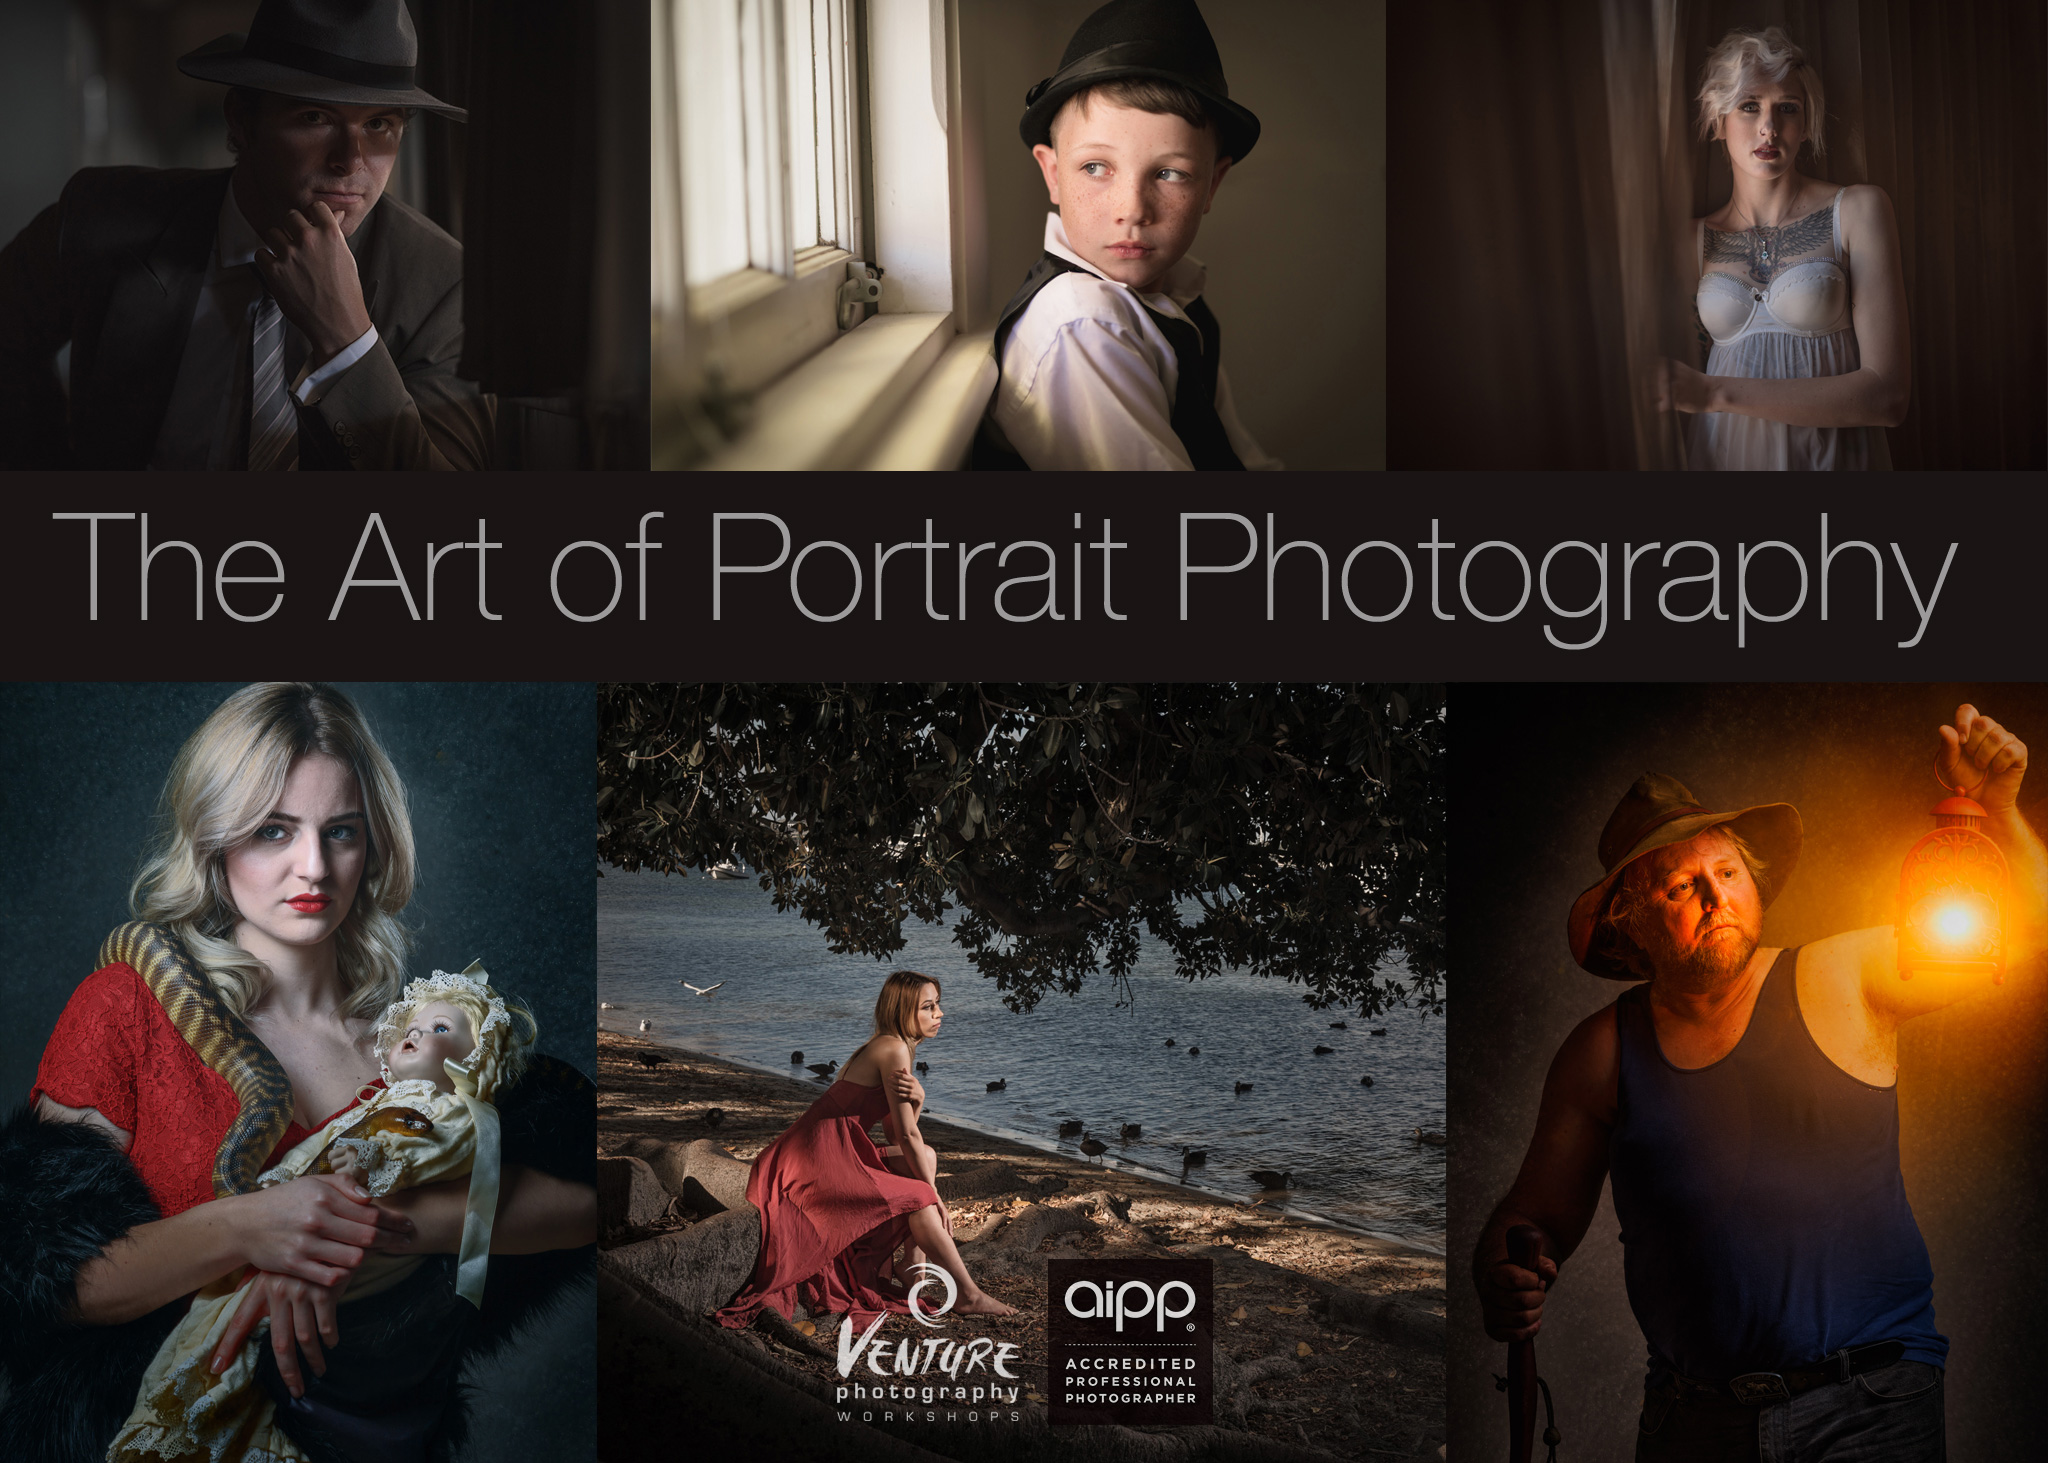 The Art of Portrait Photography